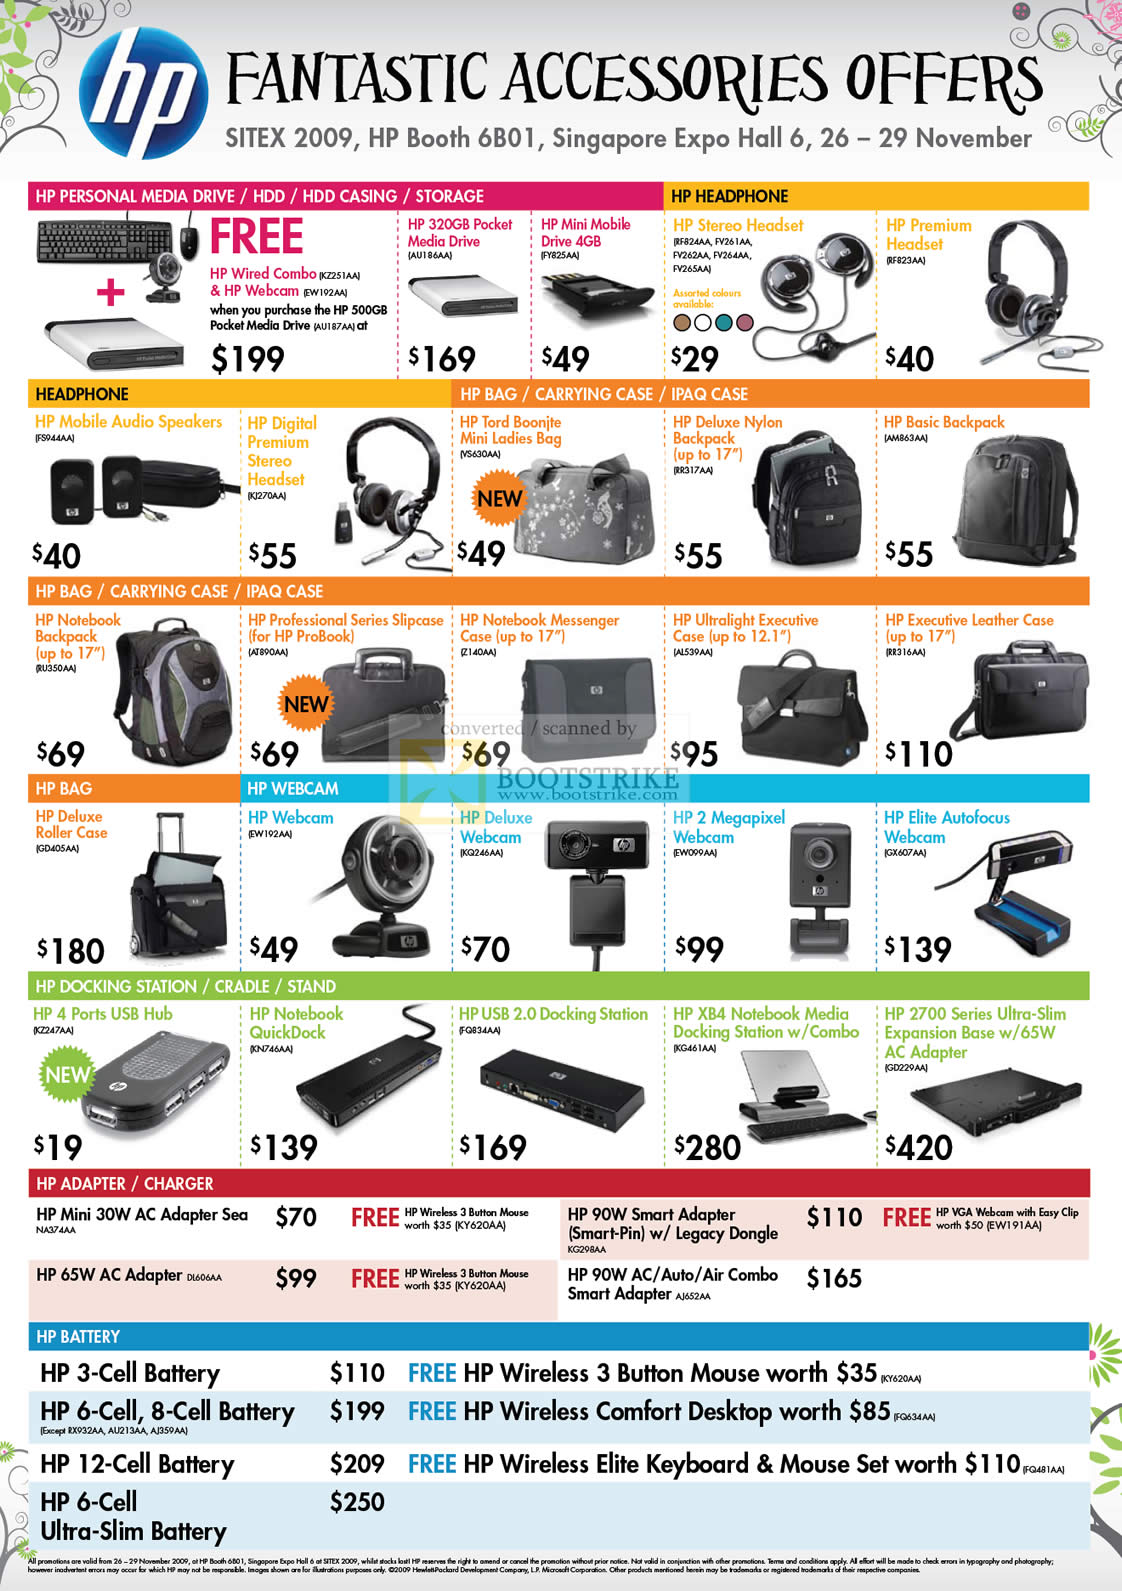 Sitex 2009 price list image brochure of HP Accessories Headphone Bag Case Webcam Docking Station Adapter Battery